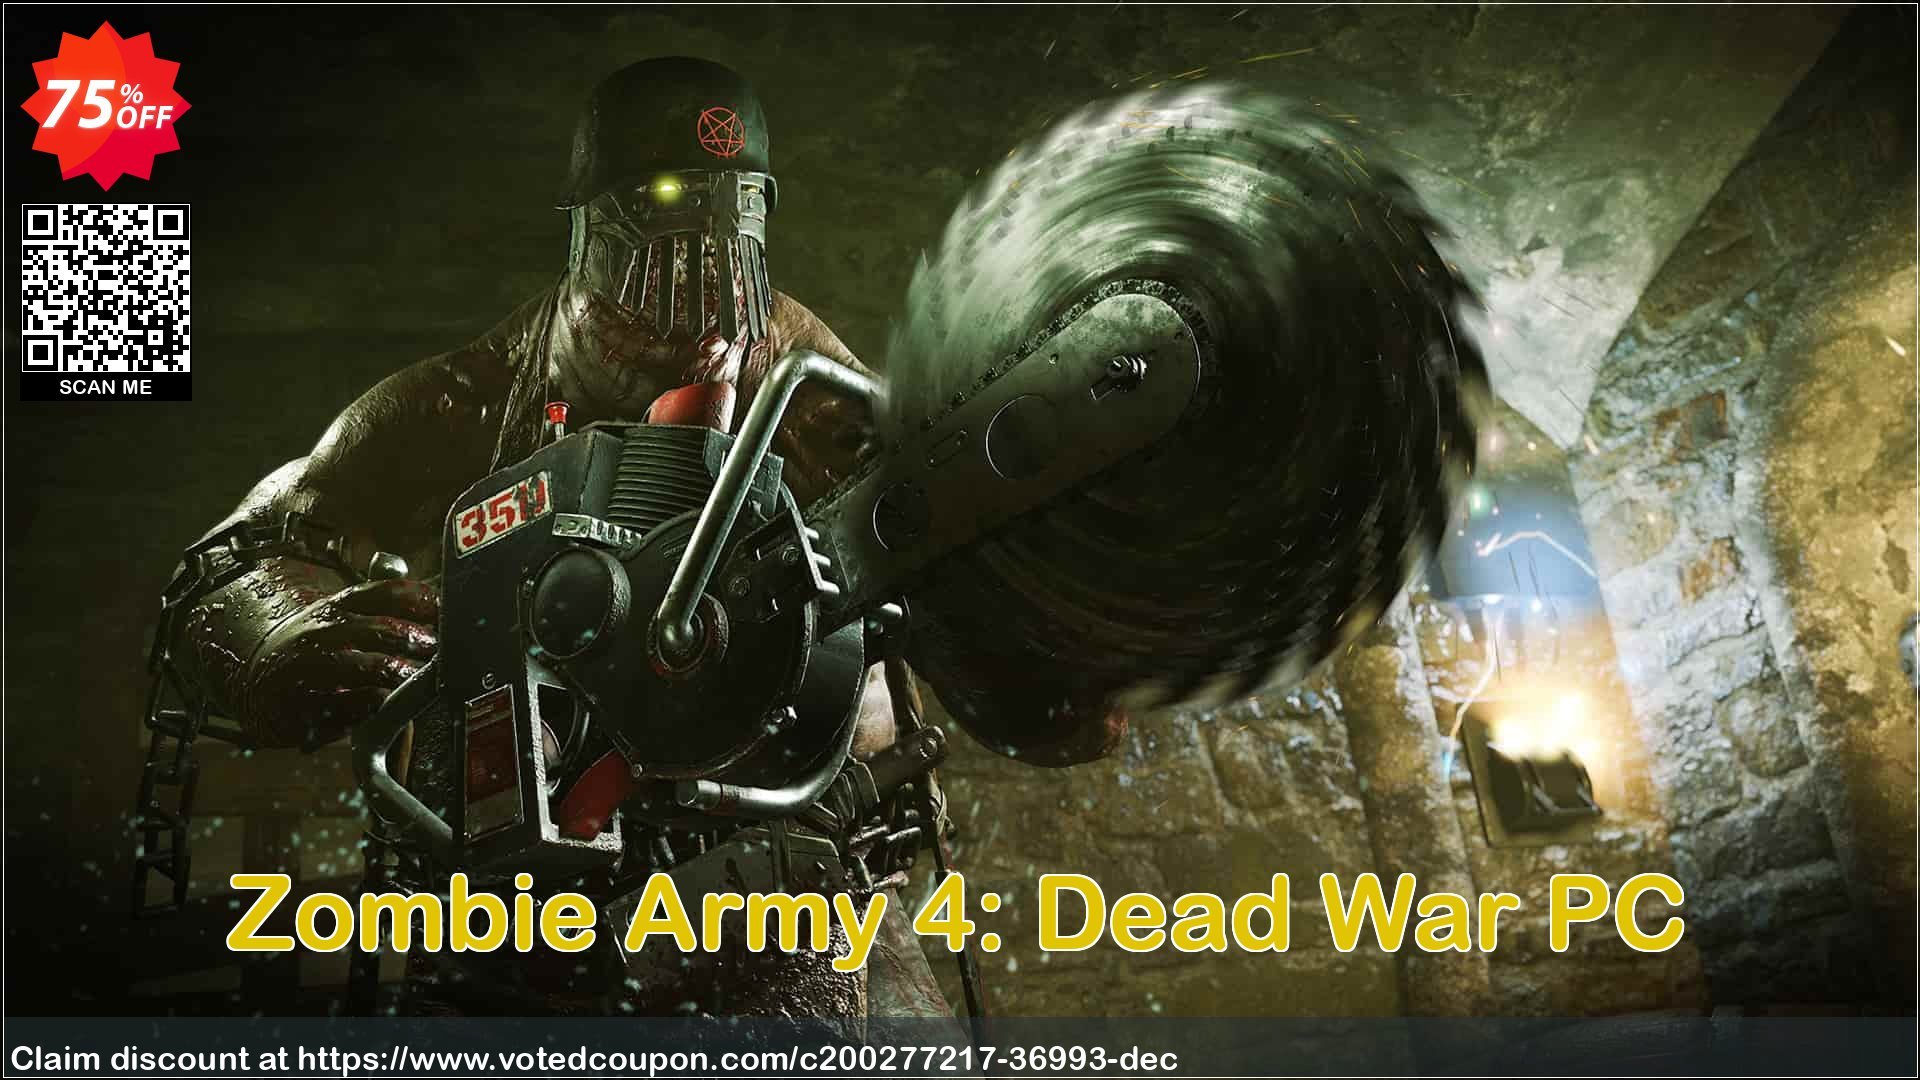 Zombie Army 4: Dead War PC Coupon Code Apr 2024, 75% OFF - VotedCoupon